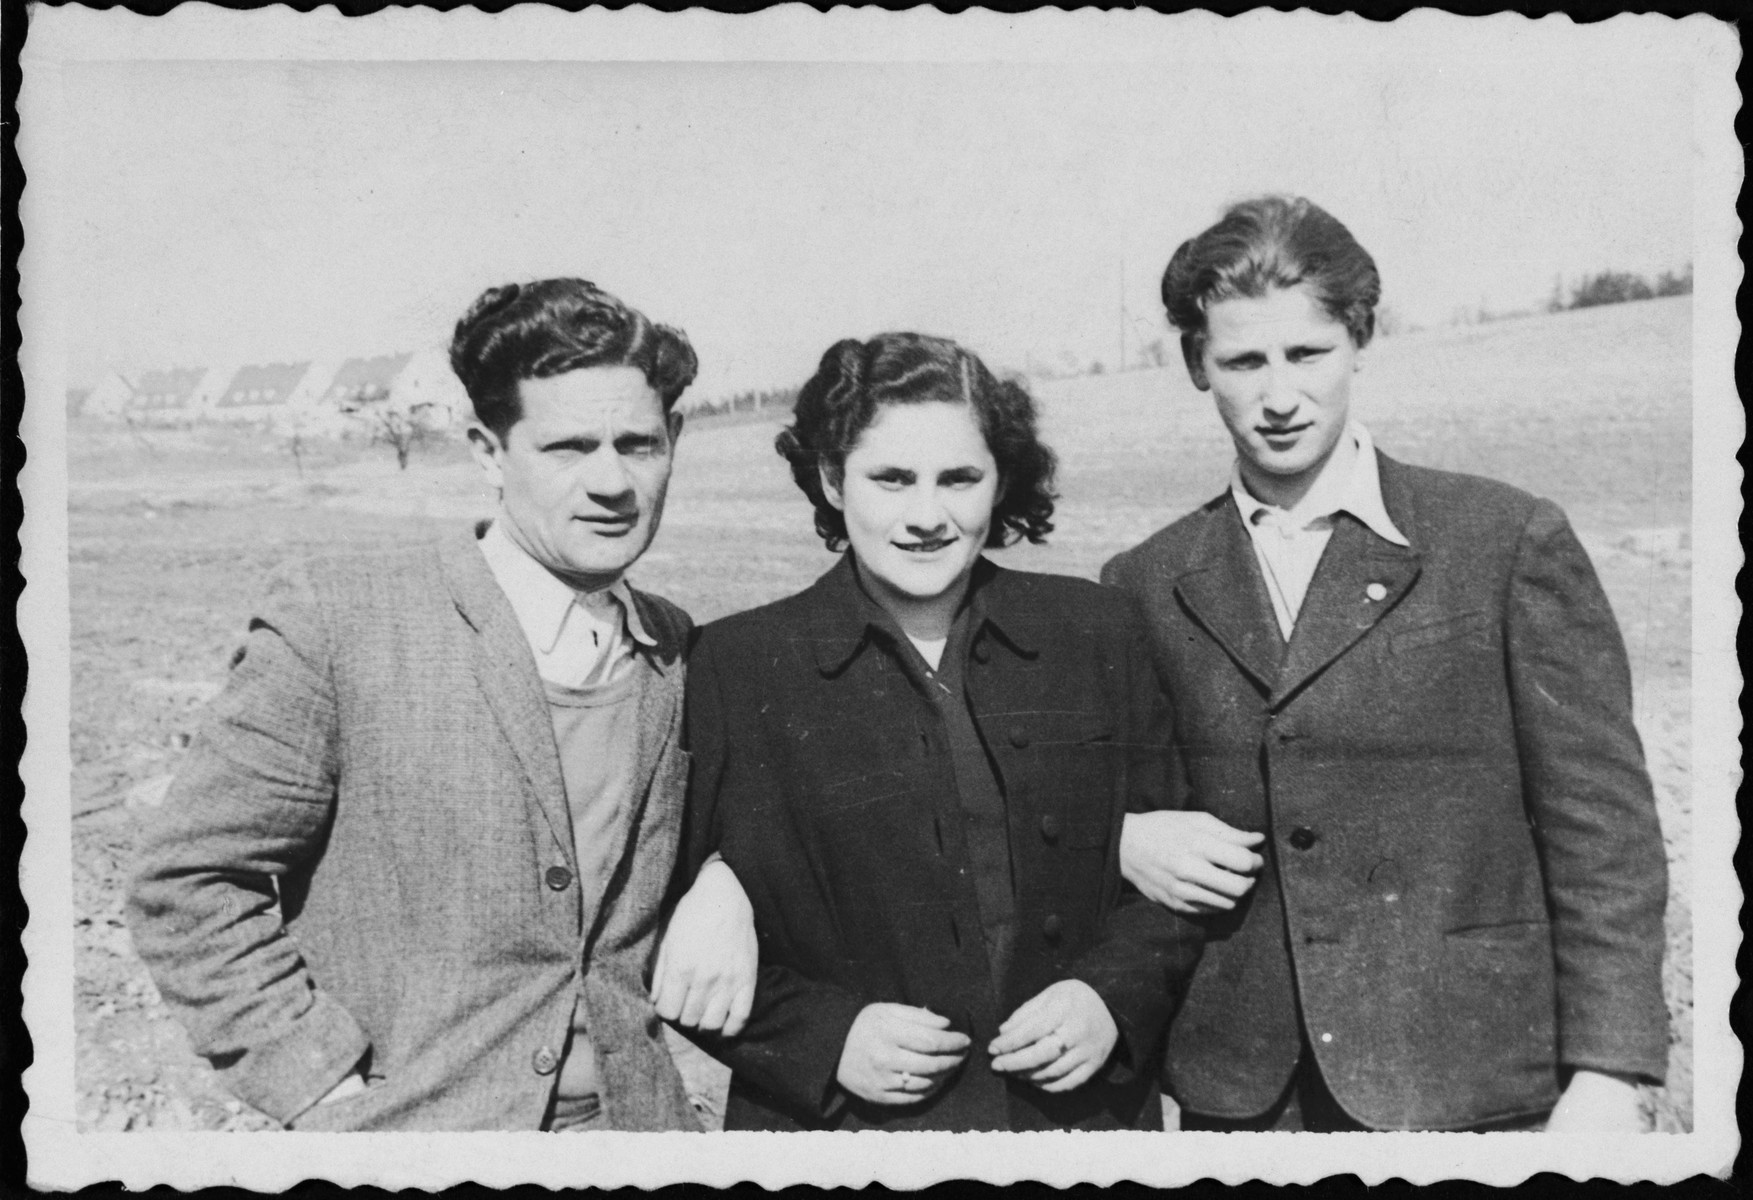 Portrait of three young people in the Bindermichl displaced persons' camp in Linz, Austria.

Among those pictured is David Suchman (far left).